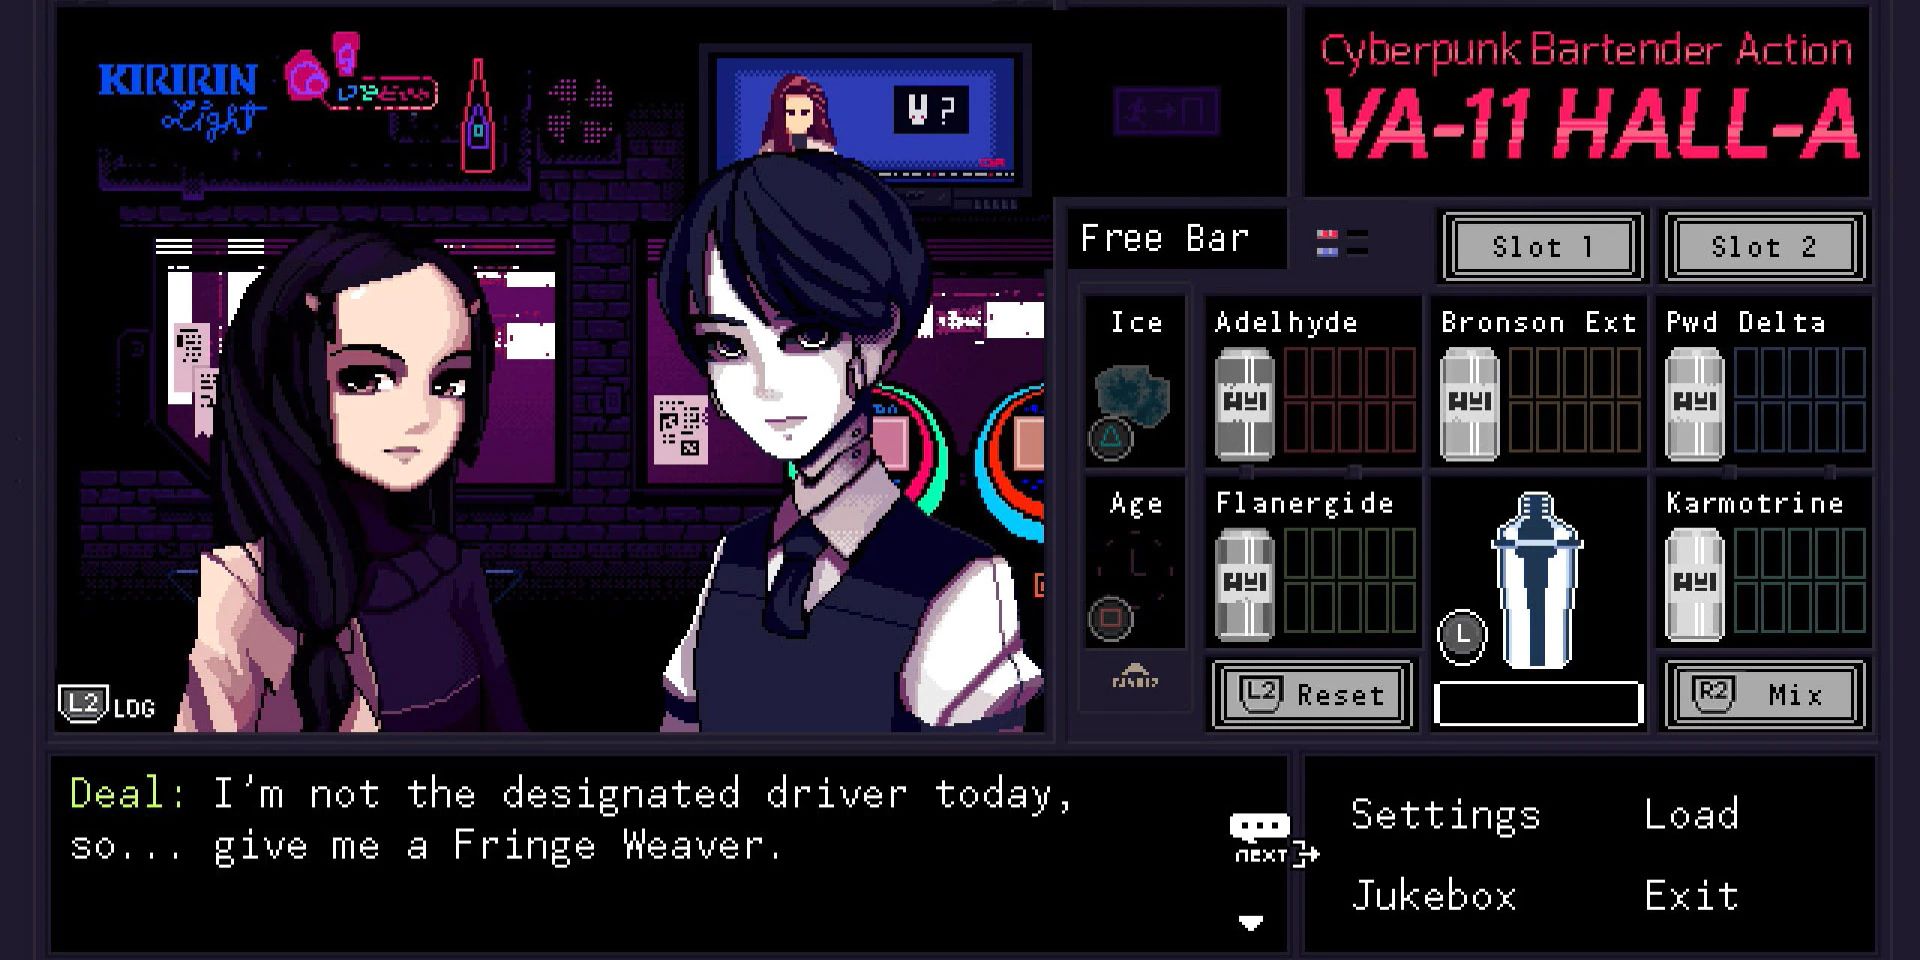 The player negotiates with 2 female bartenders in VA-11 HALL-A: Cyberpunk Bartender Action.